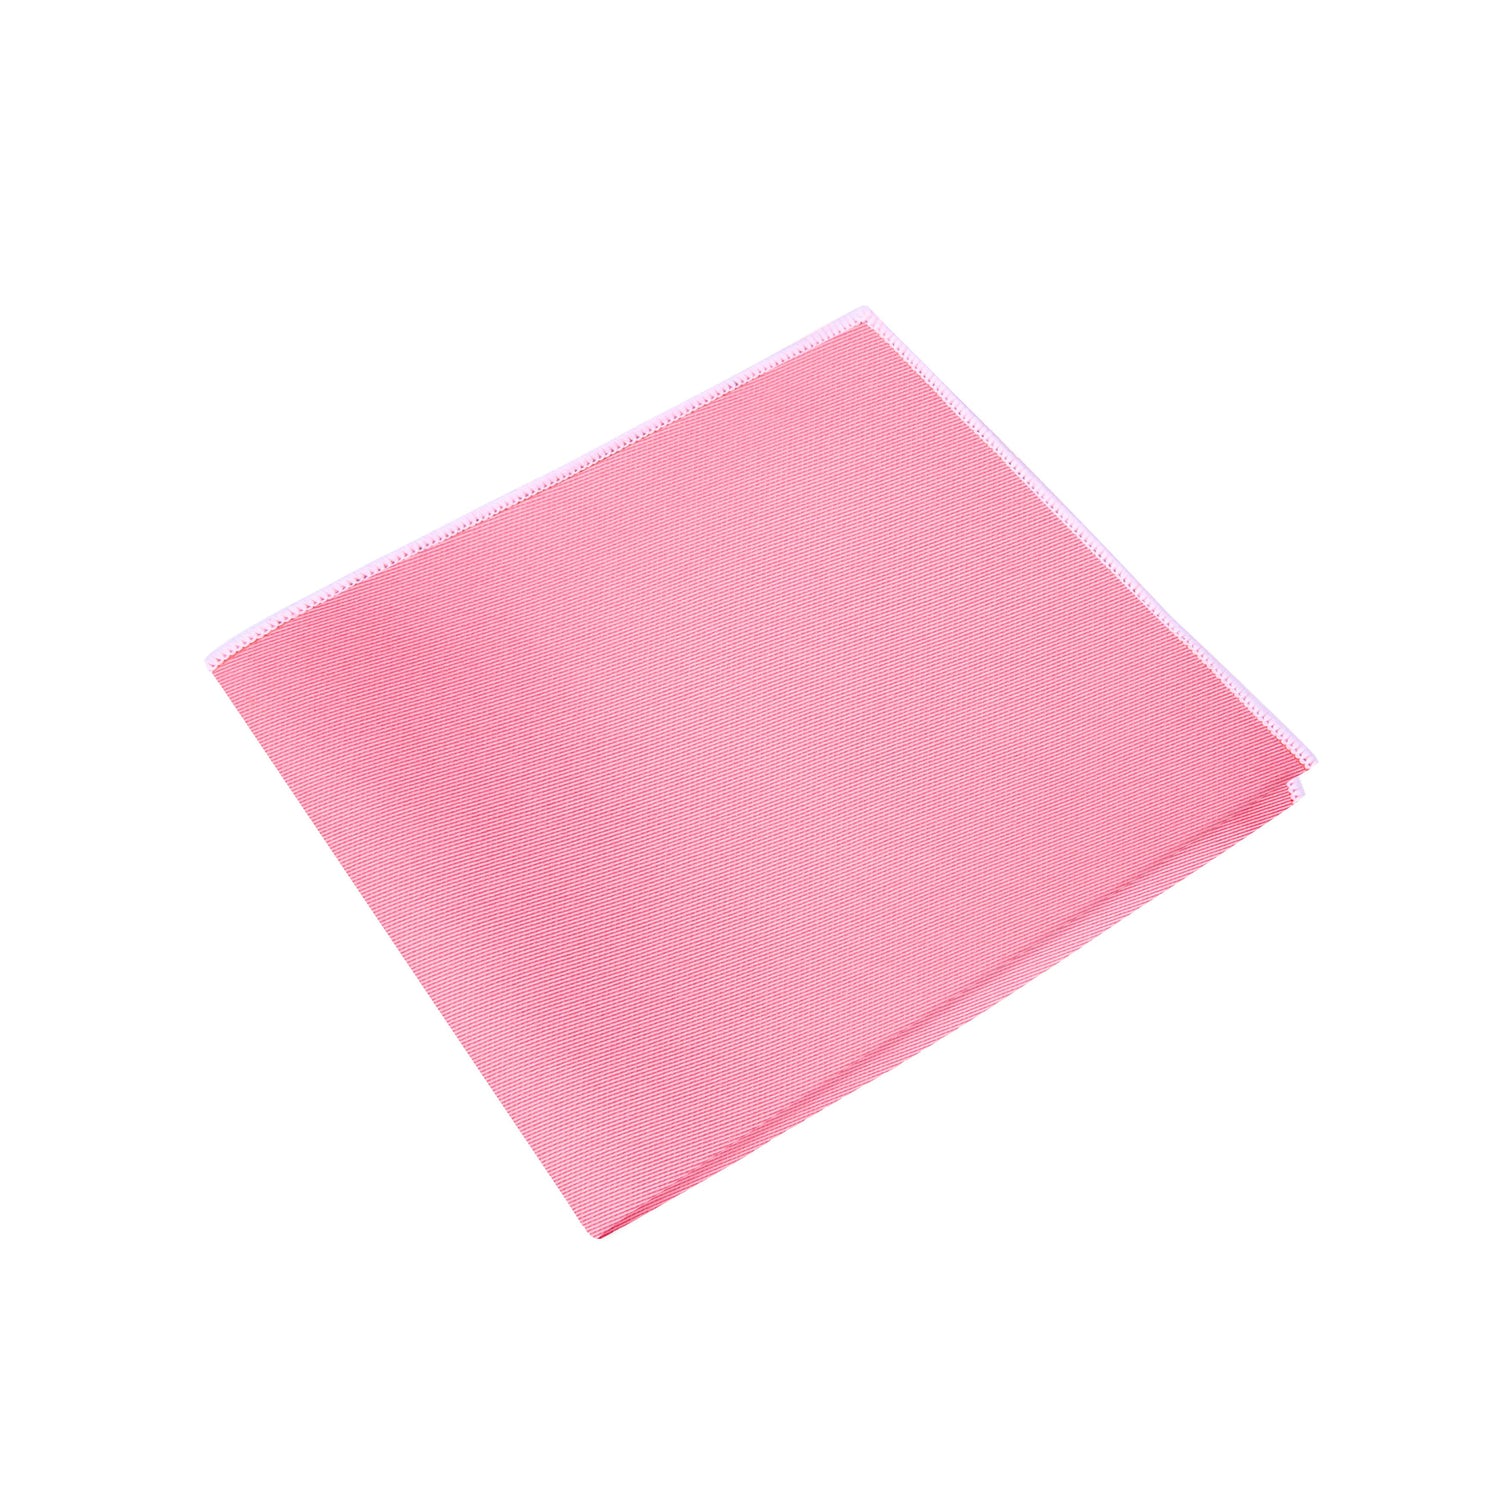 Pink with White Edges Pocket Square